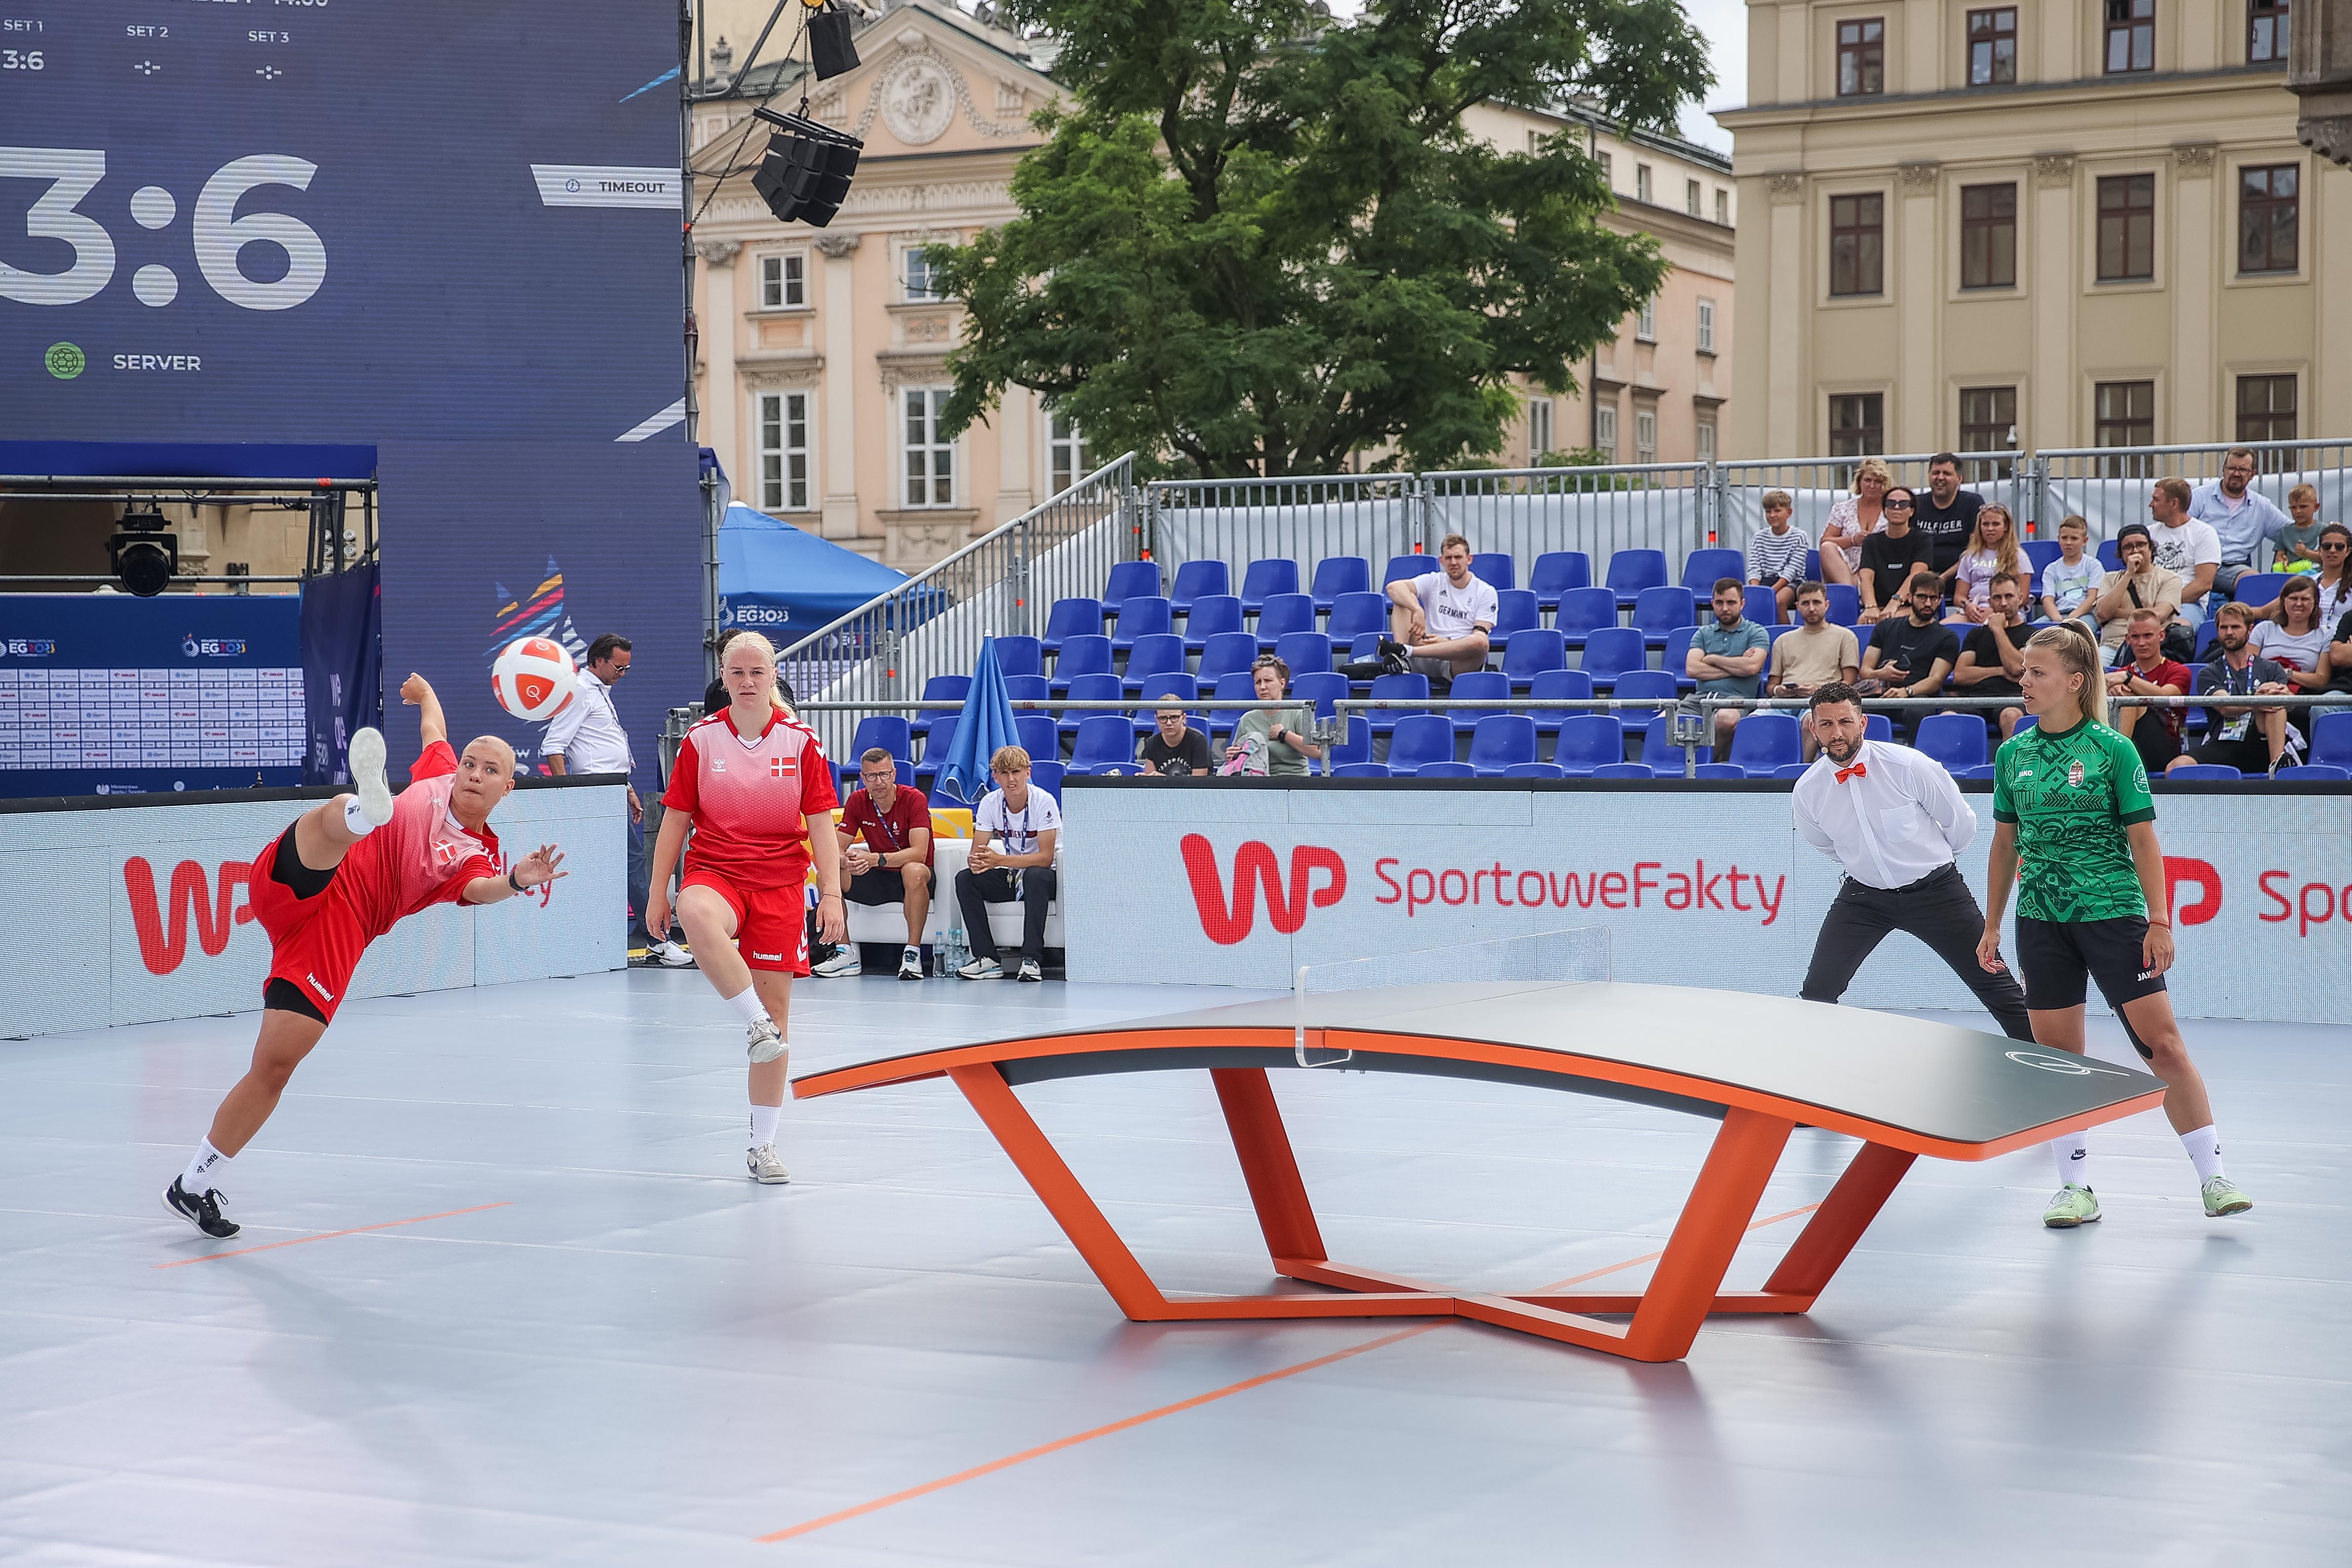 Double medals in teqball. Poland and Hungary rejoiced